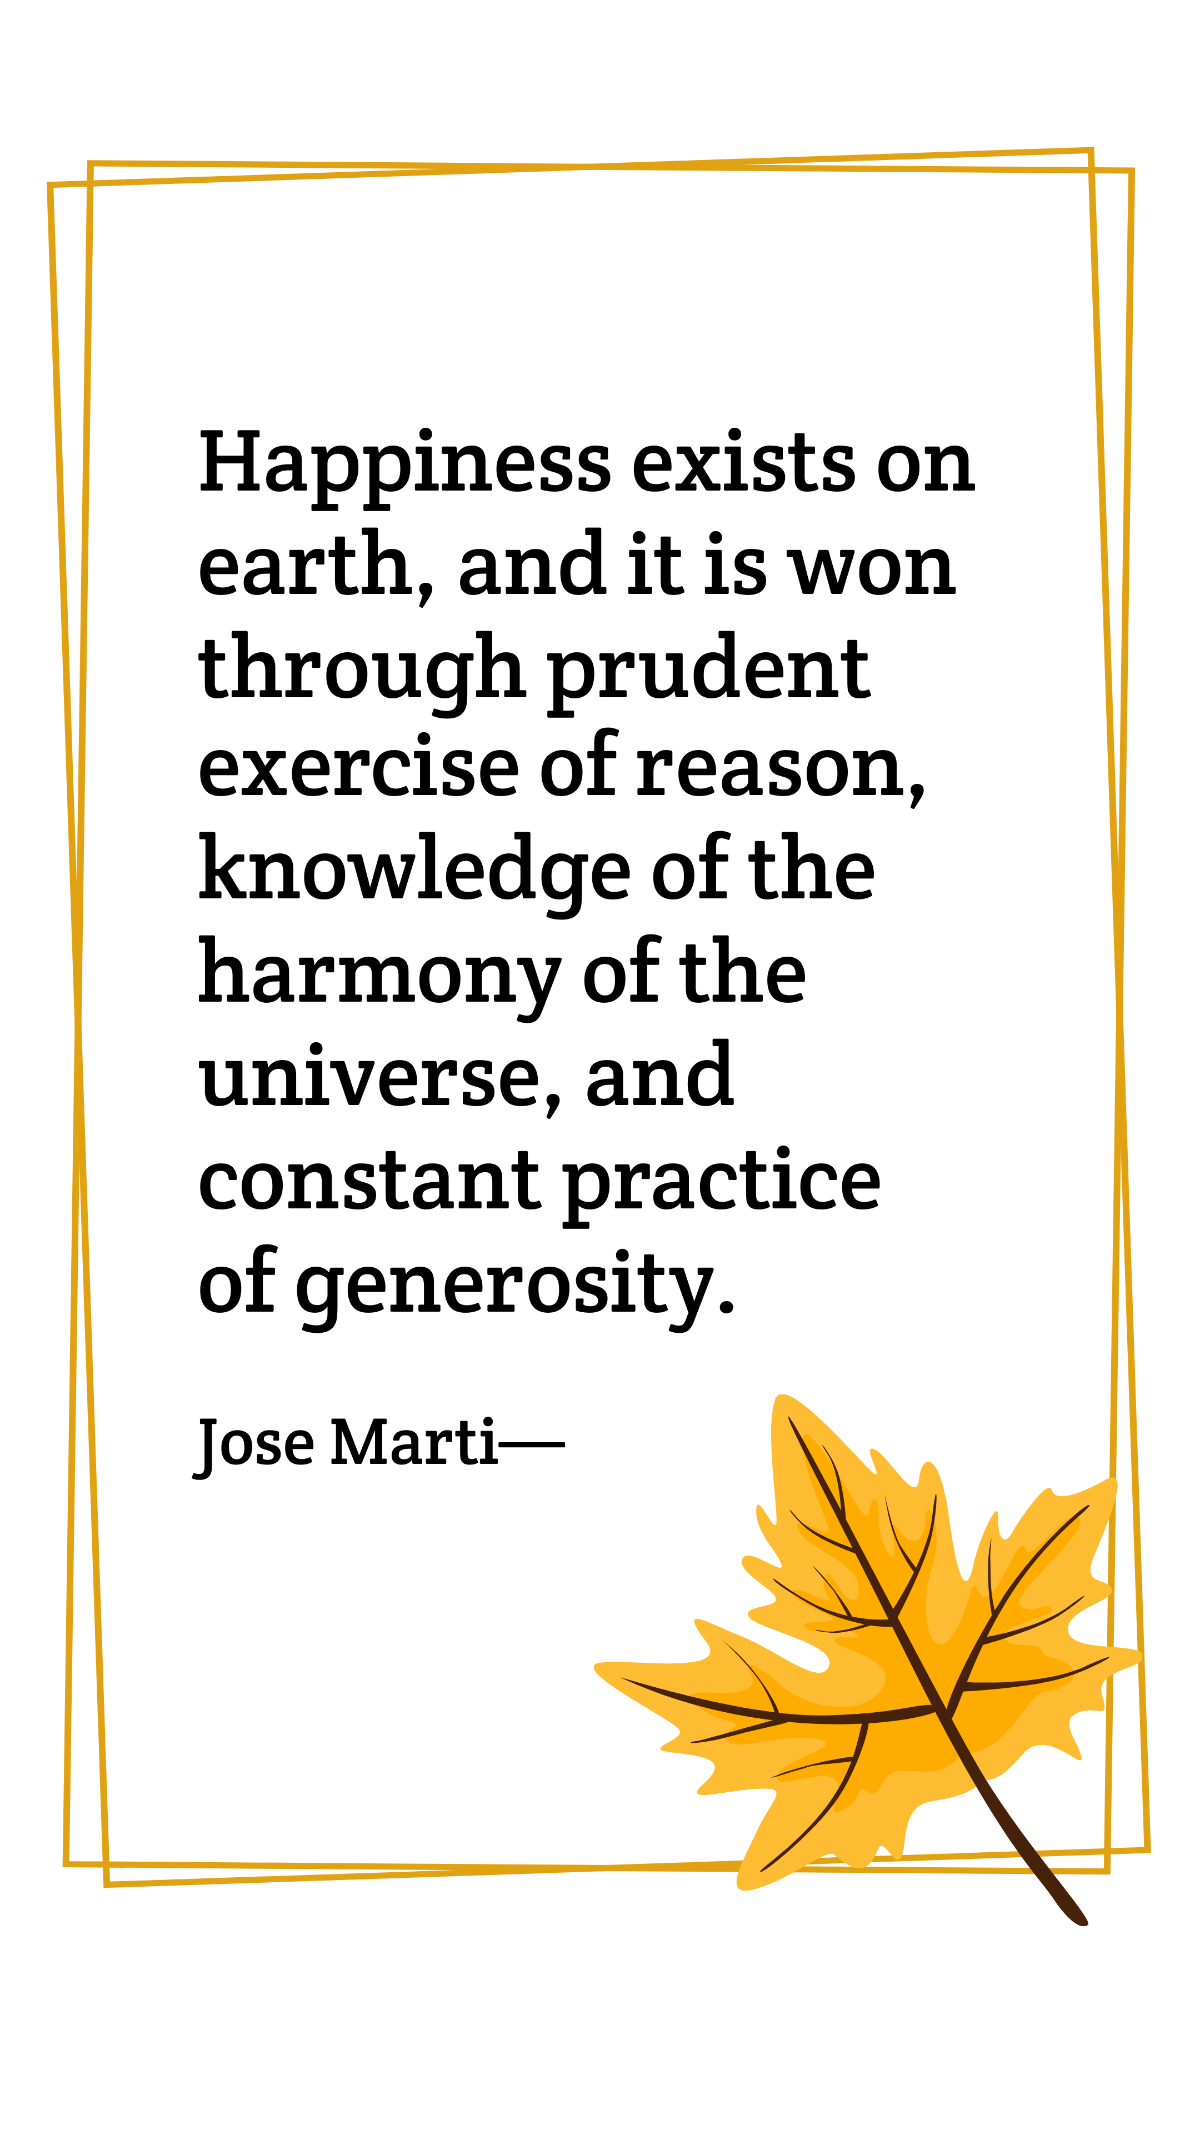 Jose Marti - Happiness exists on earth, and it is won through prudent exercise of reason, knowledge of the harmony of the universe, and constant practice of generosity. Template